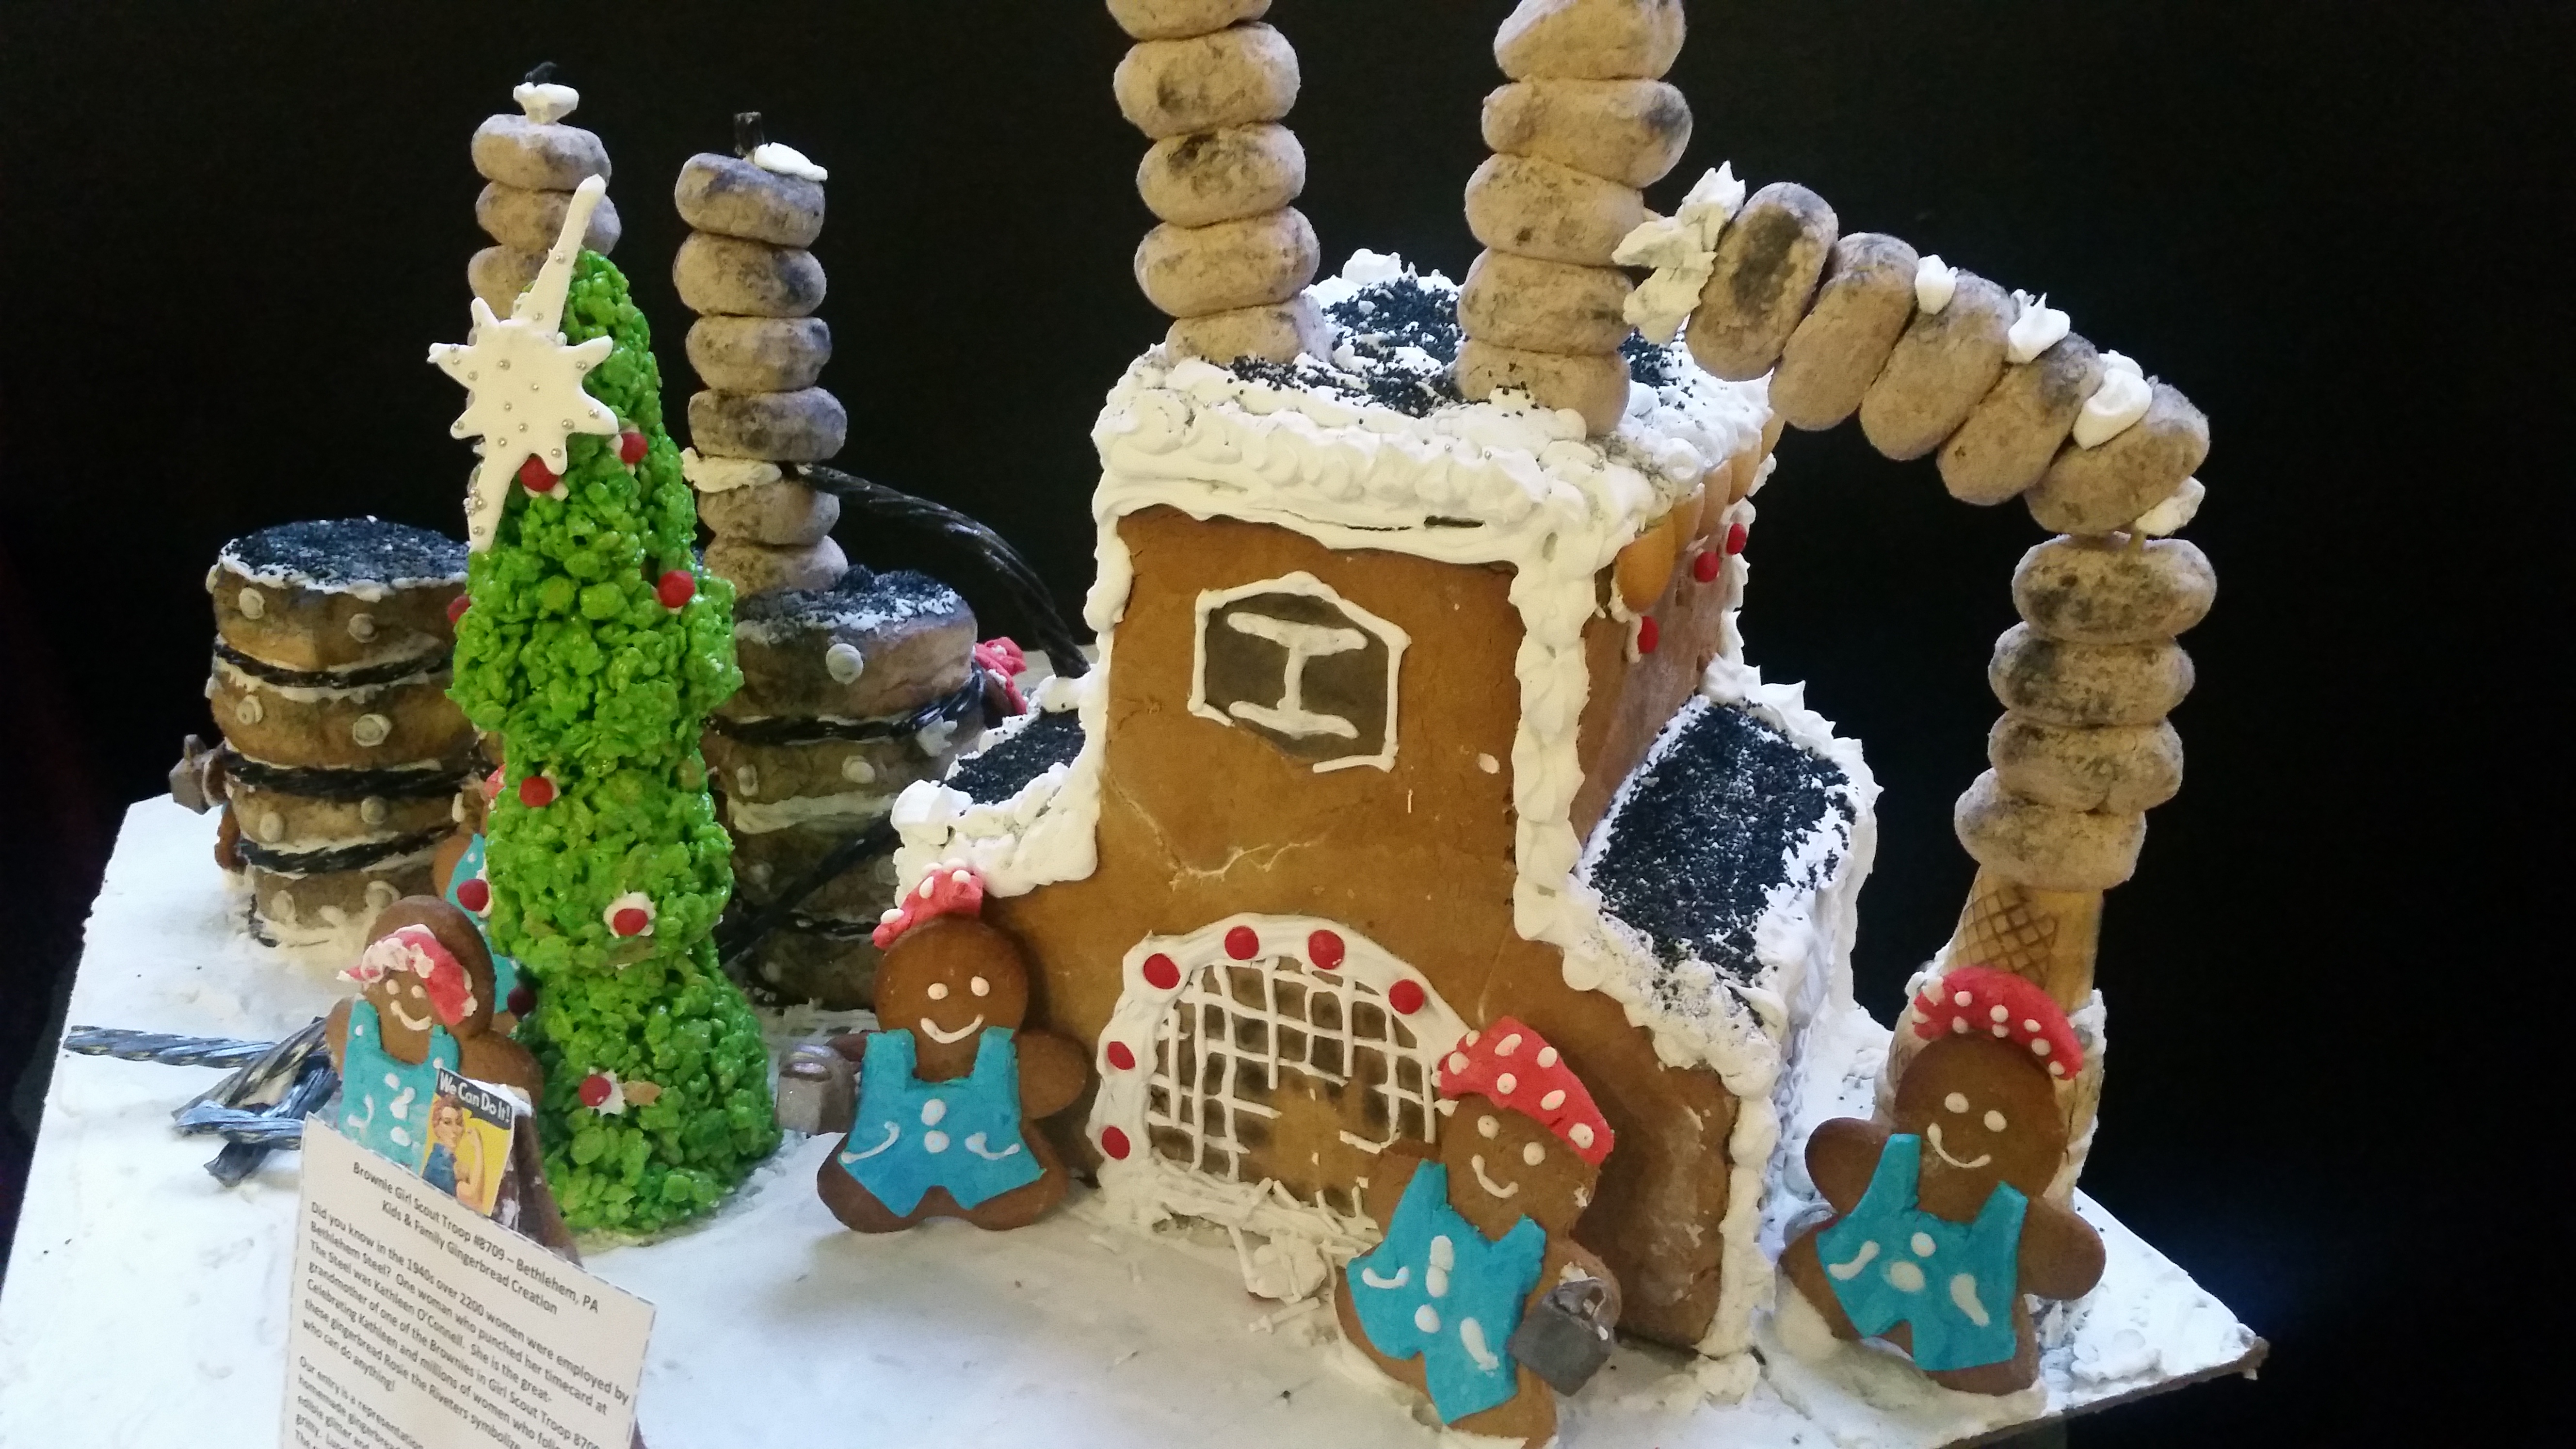 Winners Announced in Annual Gingerbread House Competition